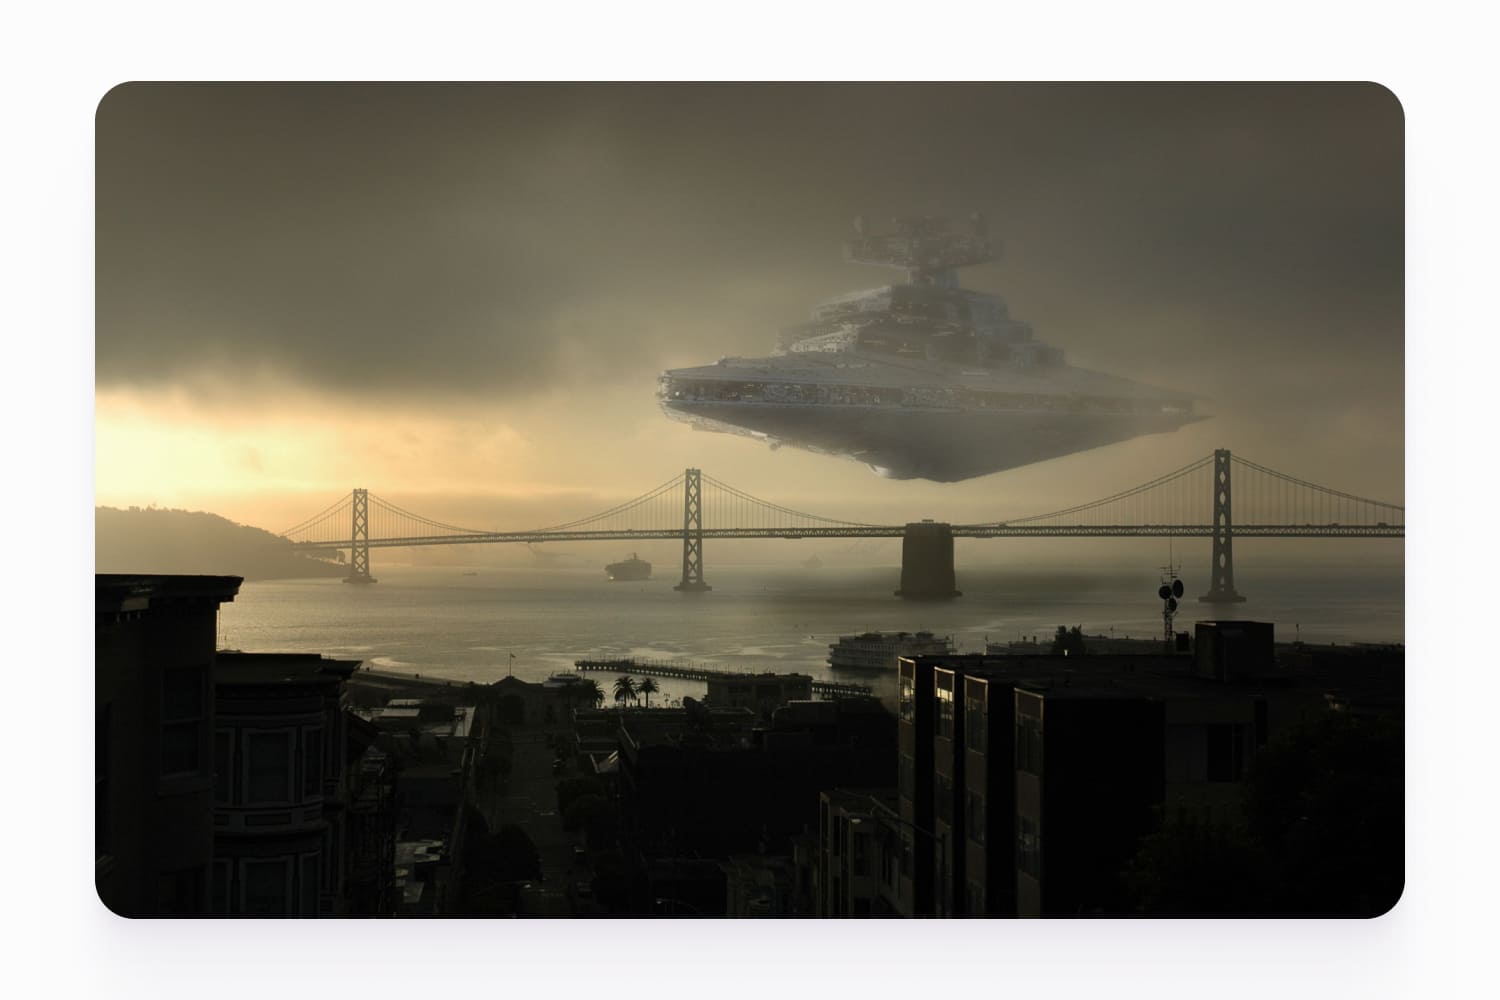 Image of a Star Destroyer over the Bay Bridge.